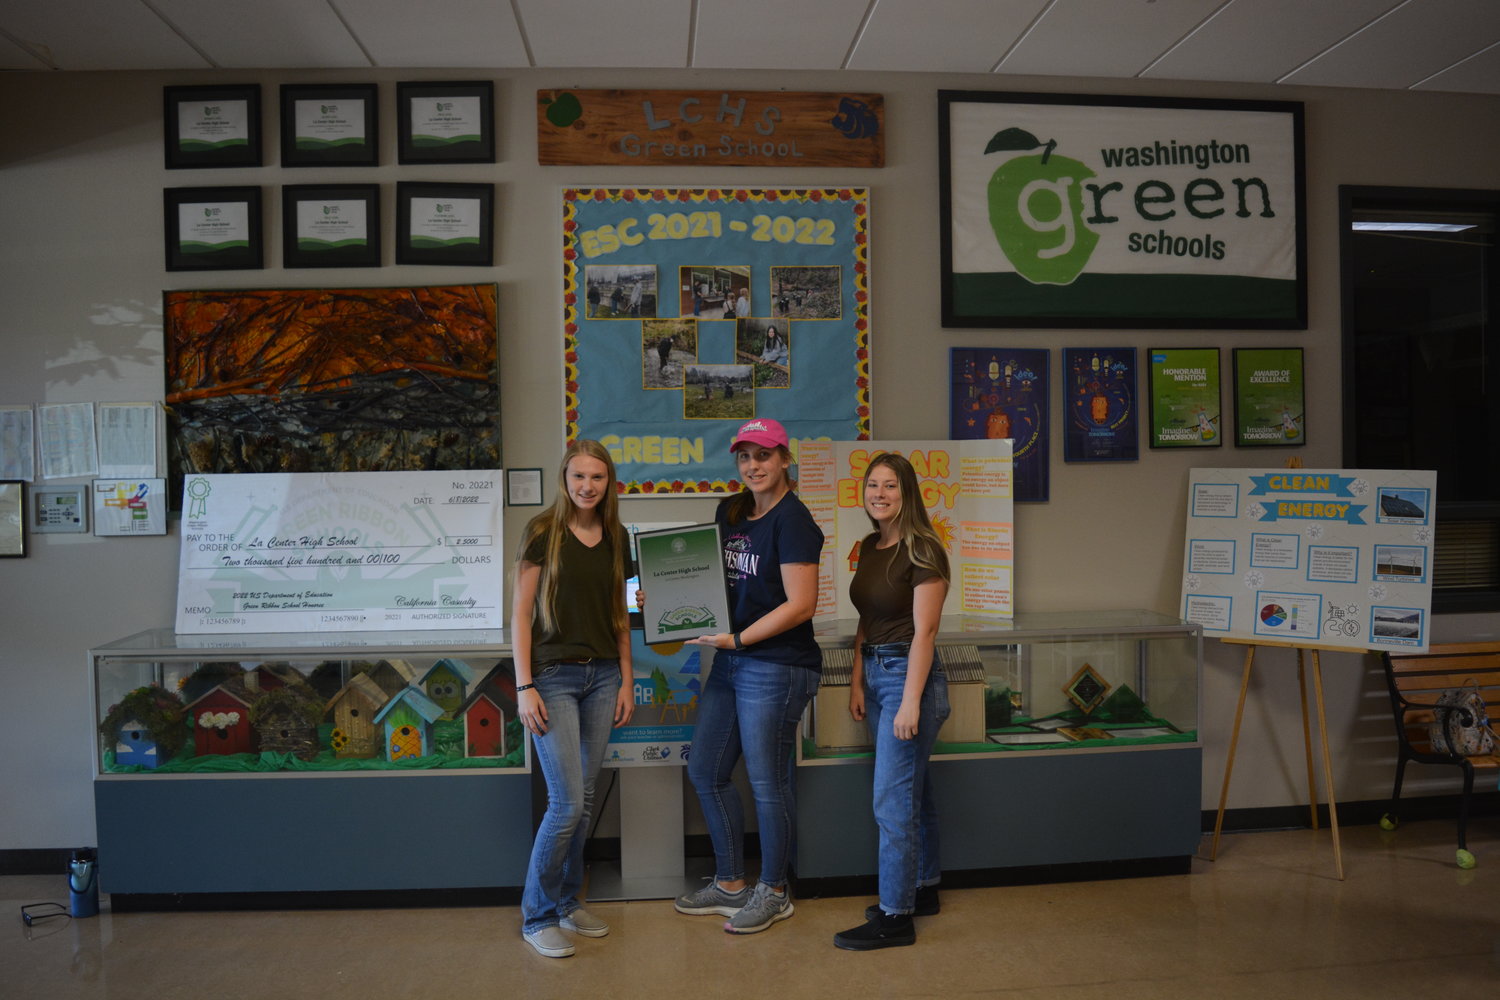 Officers from La Center High School’s Environmental Action Team show off their Green Ribbon Award plaque in front of the team’s display at the school on Aug. 2.